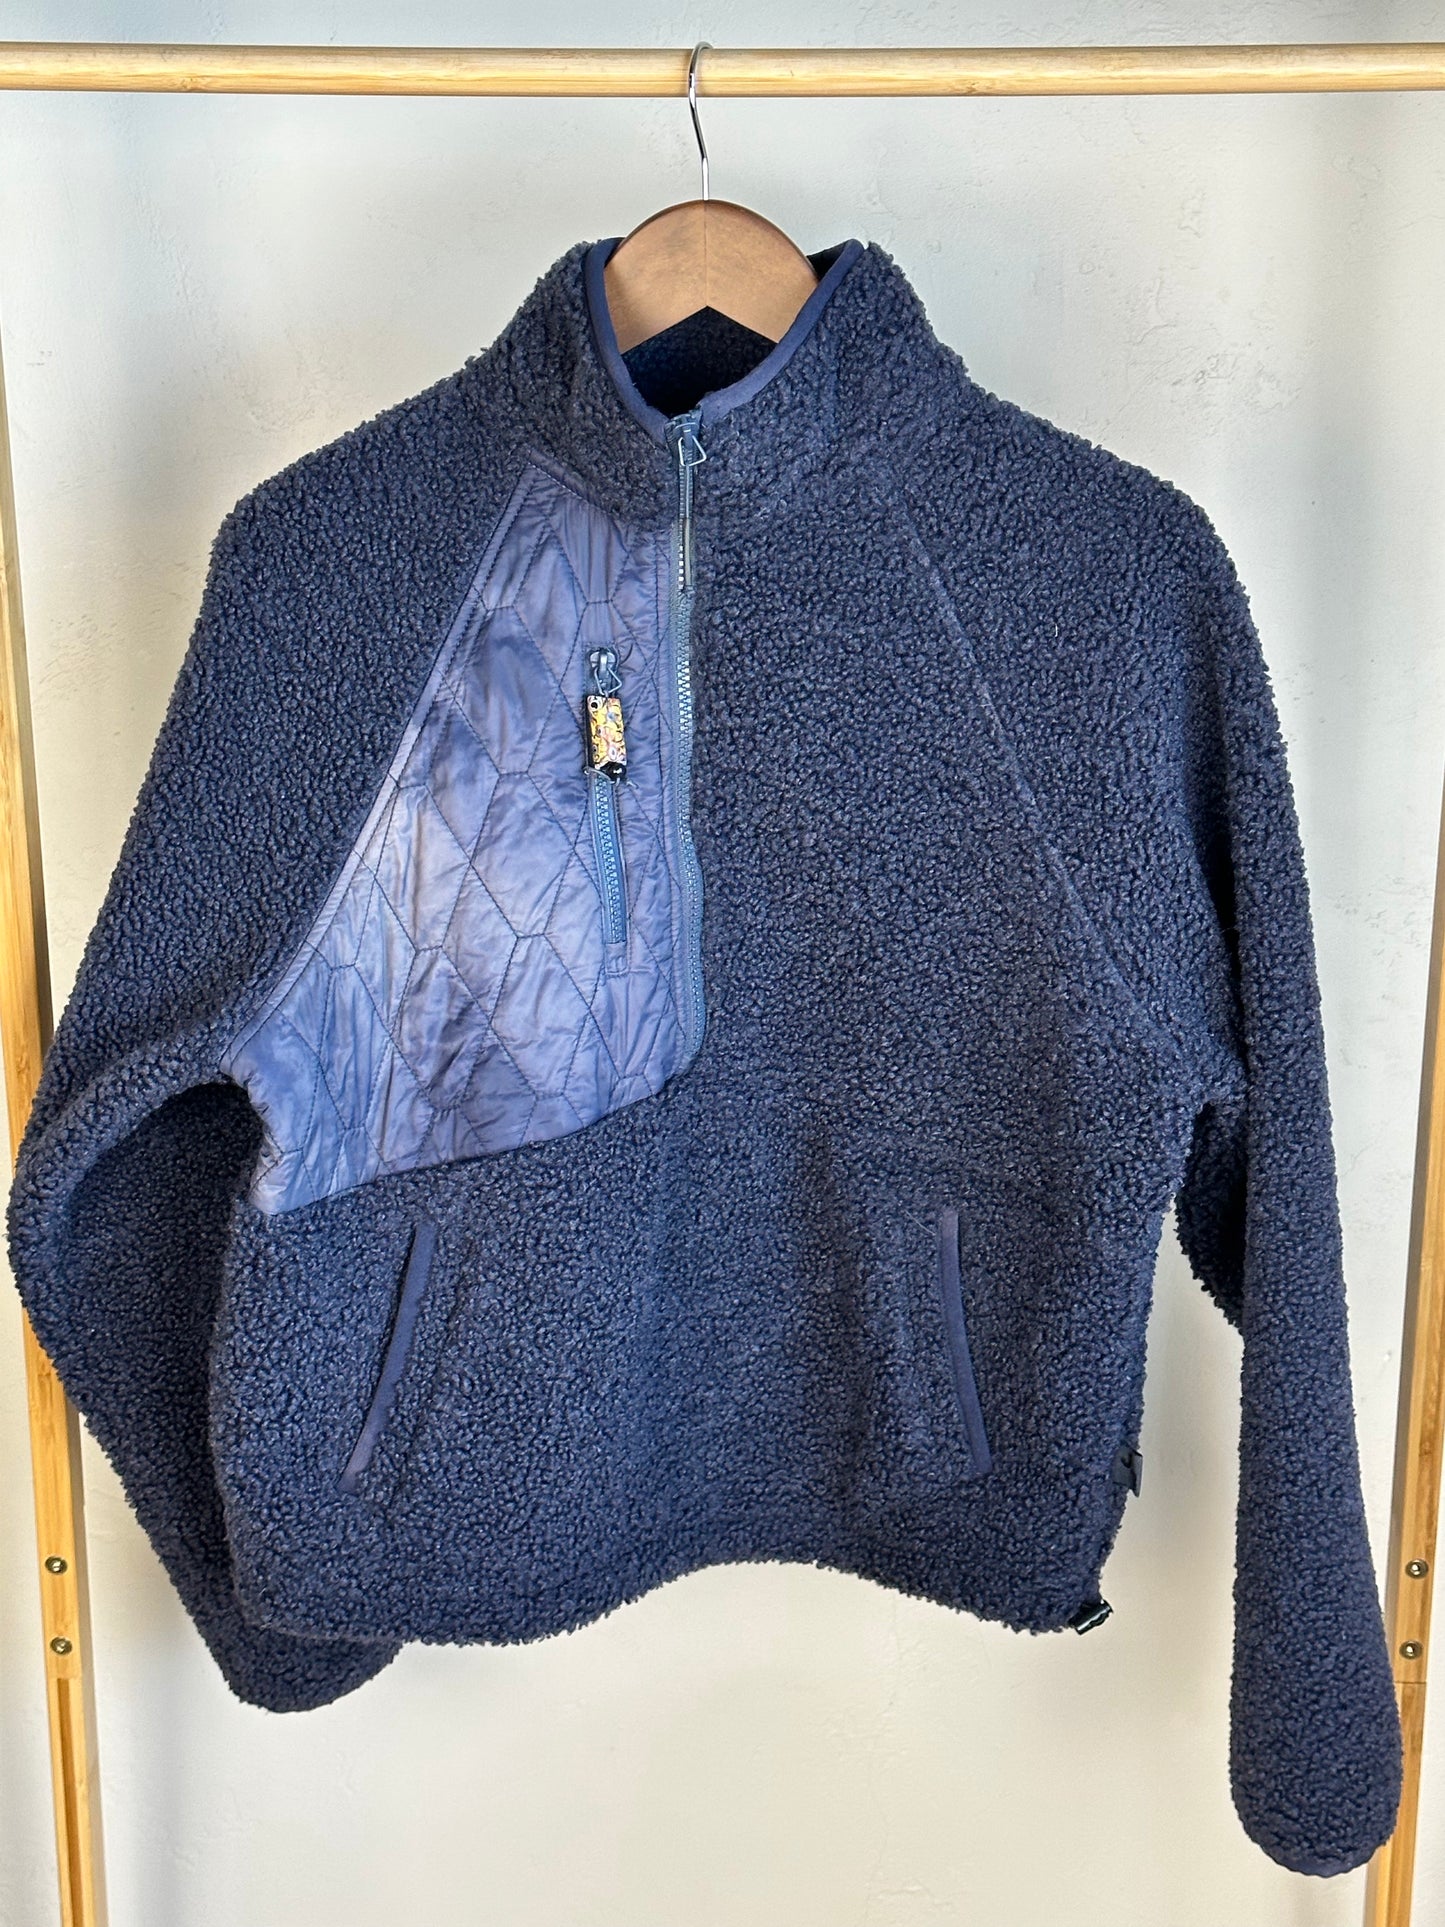 Upcycled Joy Lab Reverse-Dyed Crop Sweatshirt / Hand Dyed by Sharon